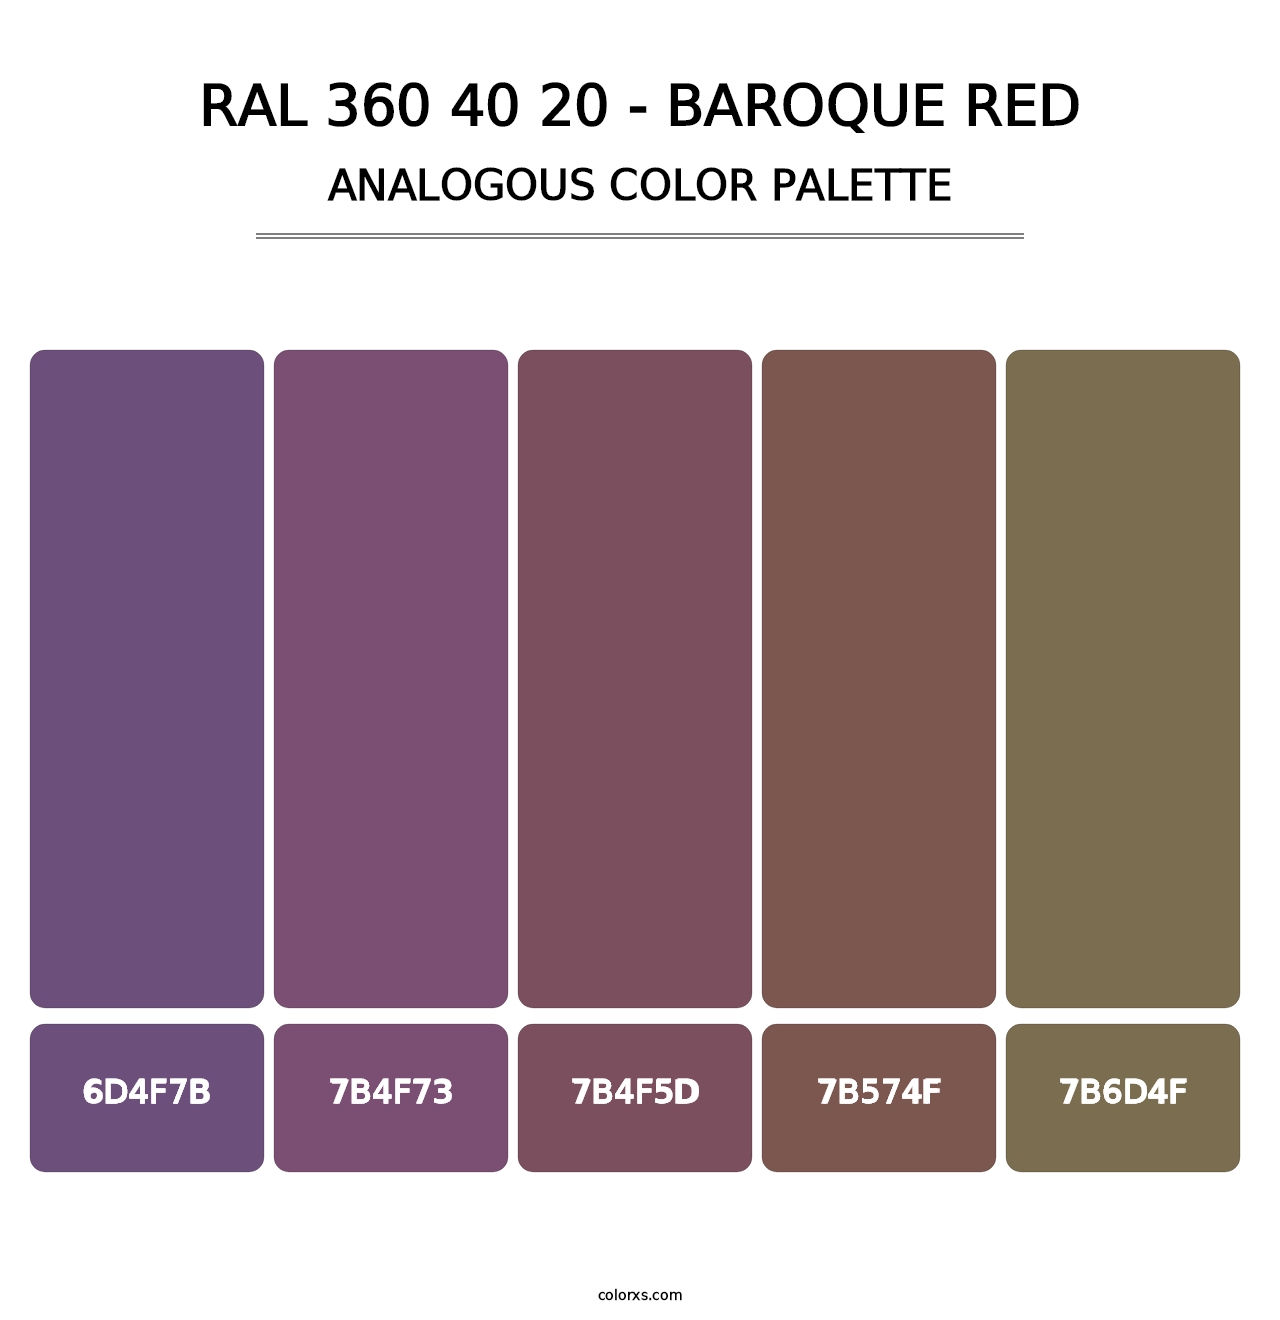 RAL 360 40 20 - Baroque Red - Analogous Color Palette